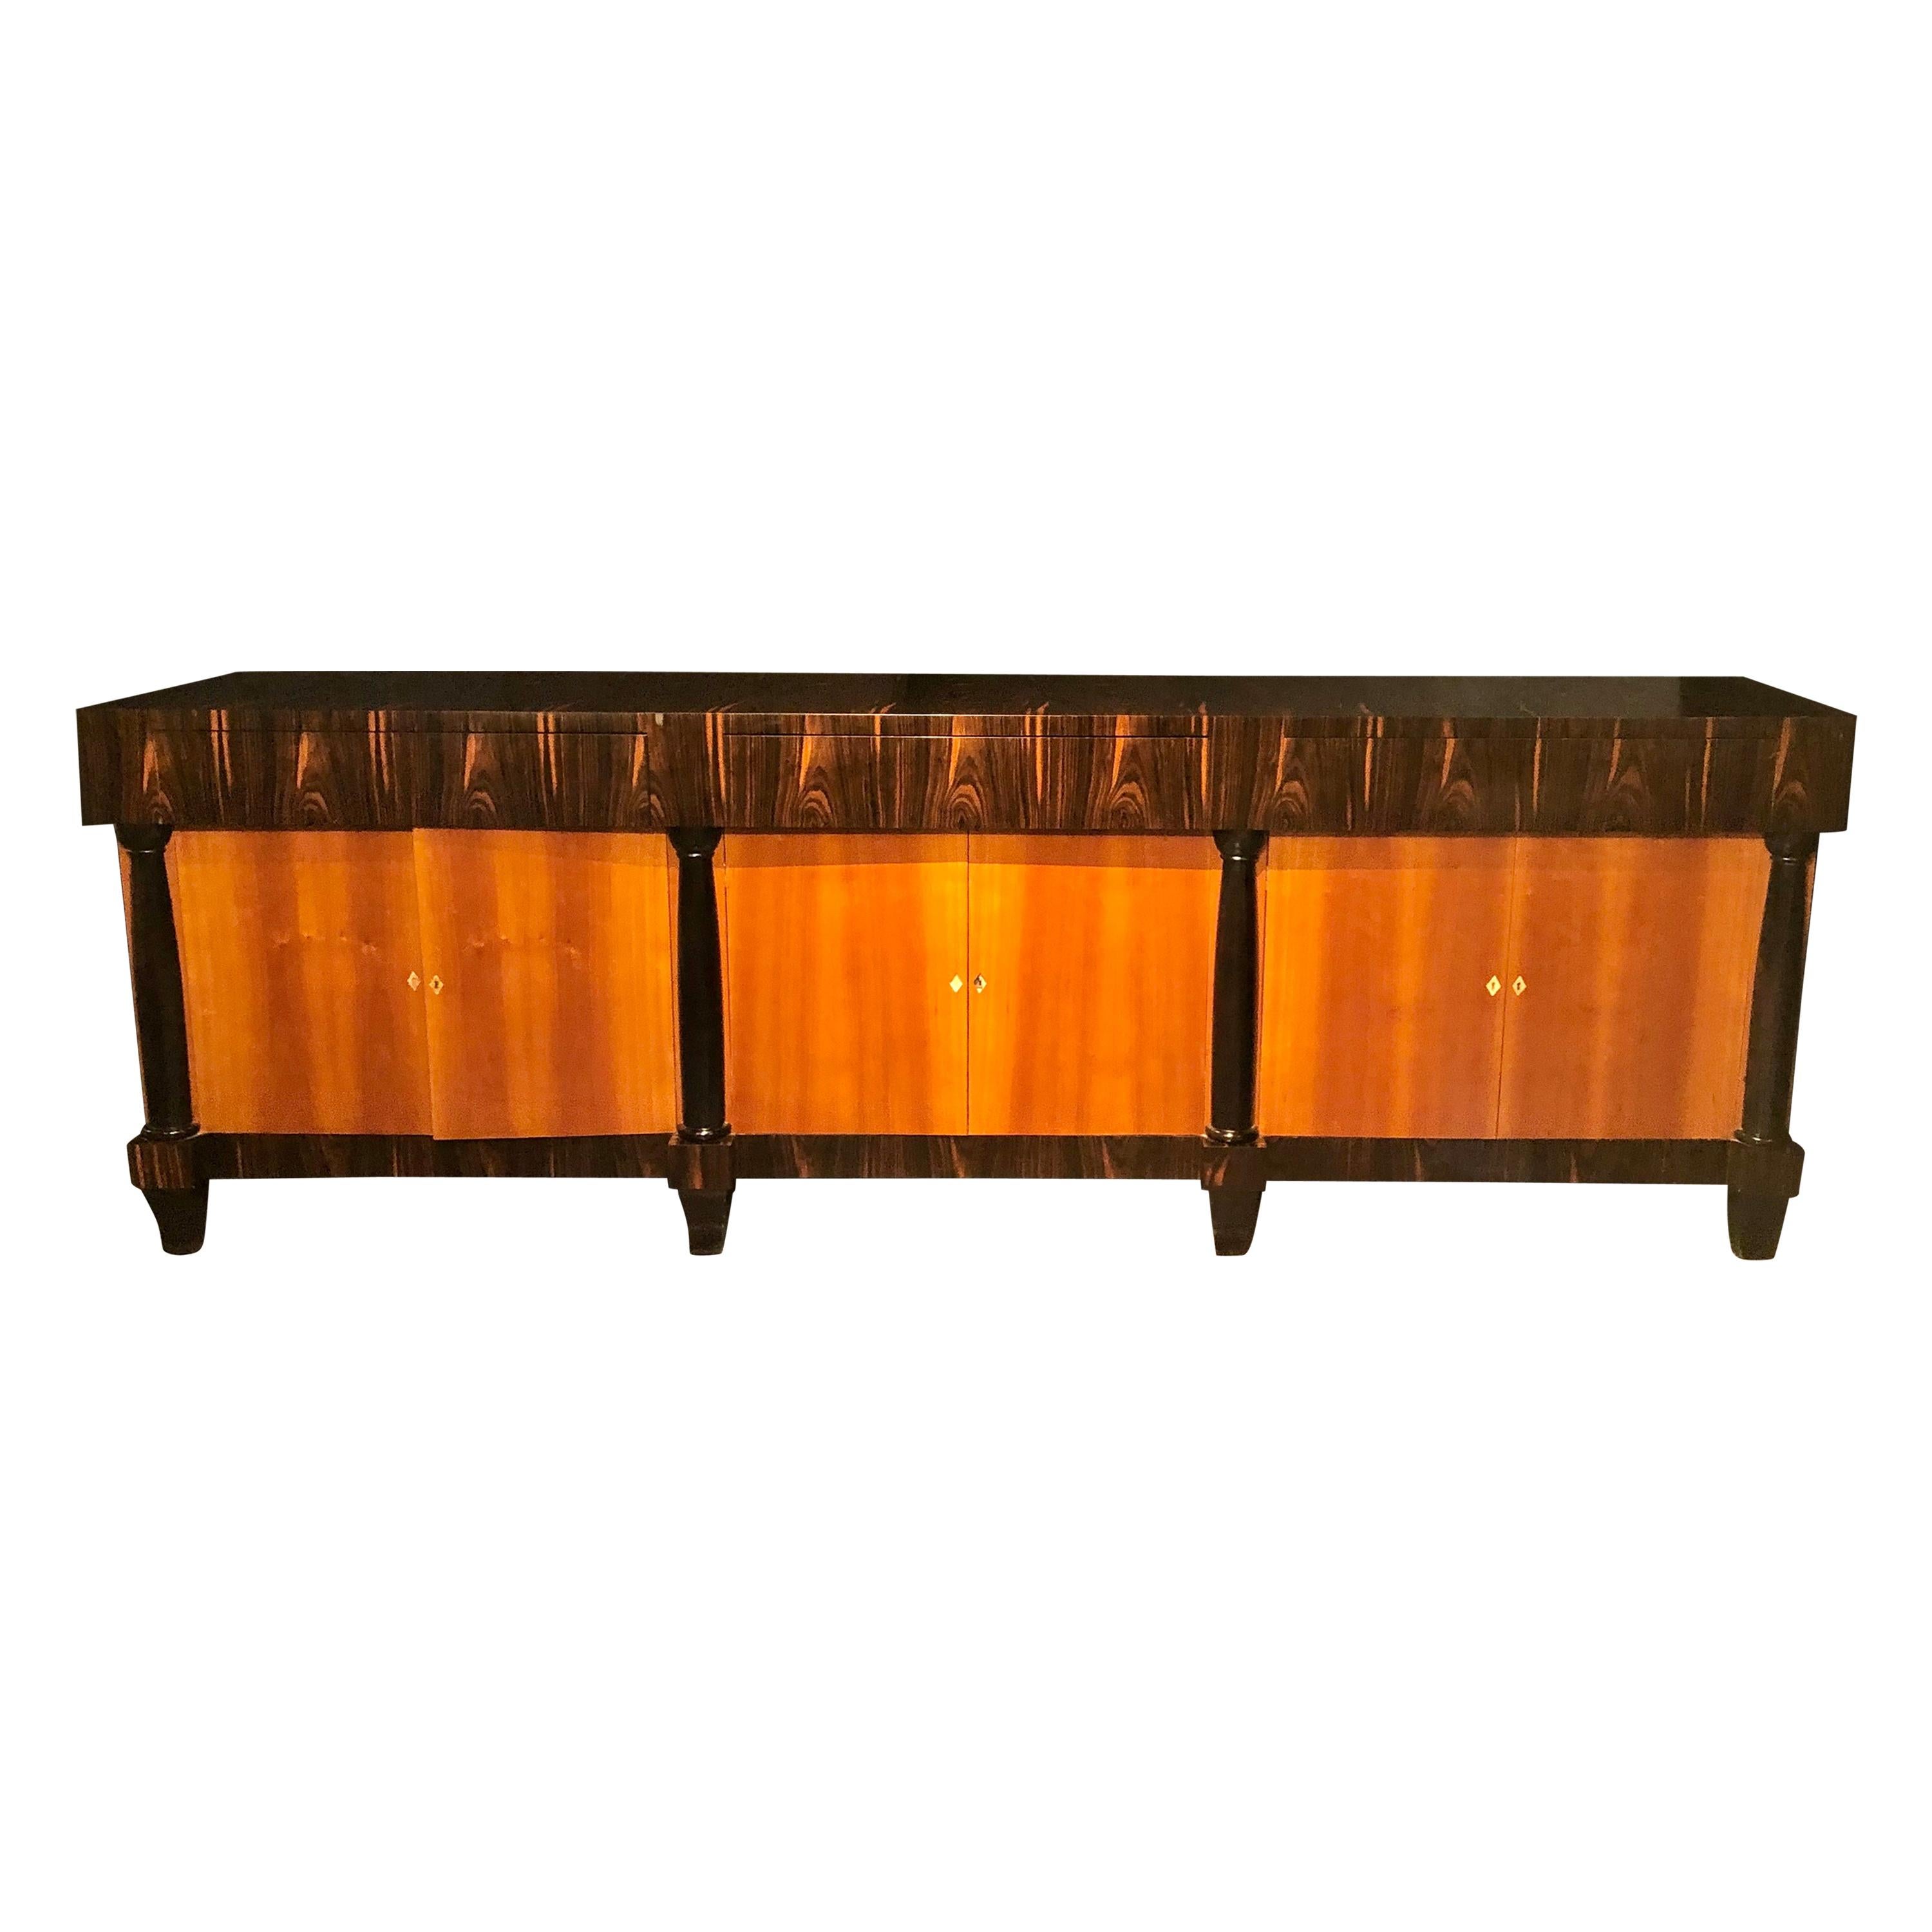 French Art Deco, Large Sideboard, Ebonized Wood, Macassar, Lacquer, France 1930s For Sale